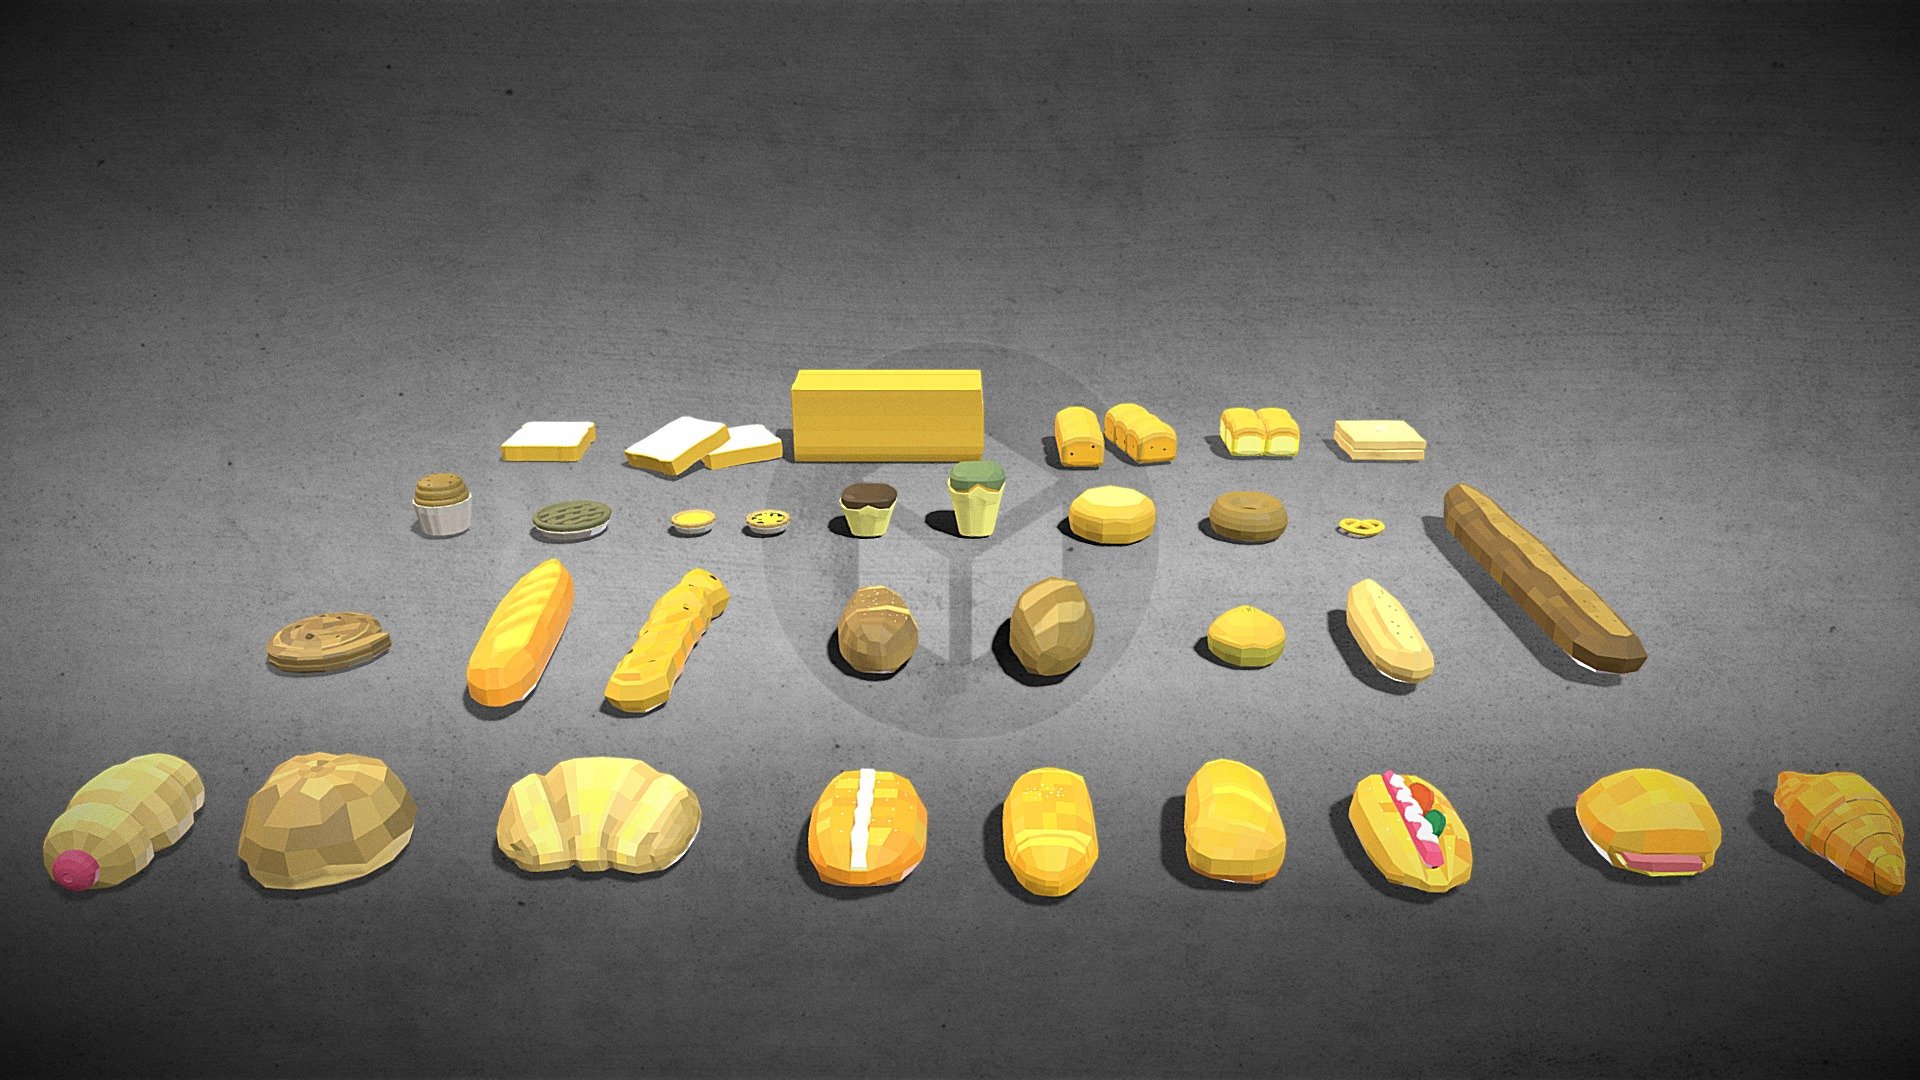 Bread is a staple food prepared from a dough of flour (usually wheat) and water, usually by baking.

This model pack includes Cocktail Bun, Coconut Bun, Apple Tart, Bagel, Baguette, Brezel, Brezen, Chocolate Cake, Cinnamon Roll, Croissant, Cup Cake, Egg Tart, French Bread, French Pudding Bread, Garlic Bread, Ham and Egg Bun, Hot Dog Bun, Muffin, Pineapple Bun, Portuguese Egg Tart, Sausage Roll, Sliced Bread, Sourdough Bread, Sweet Plain Bun, Toast, Tuna Bun, Wheat Bread with Raisin, and White Bread.  

These breads are usually sold in Hong Kong bread shop and supermarket.

30 models, game-ready assets, tested in Unity and Blender.

All together with 11000 faces only. No brand name or logos. Free to use.

My Website businessyuen.com 

Drink Pack, please visit here

Snack Pack, please visit here 3d model